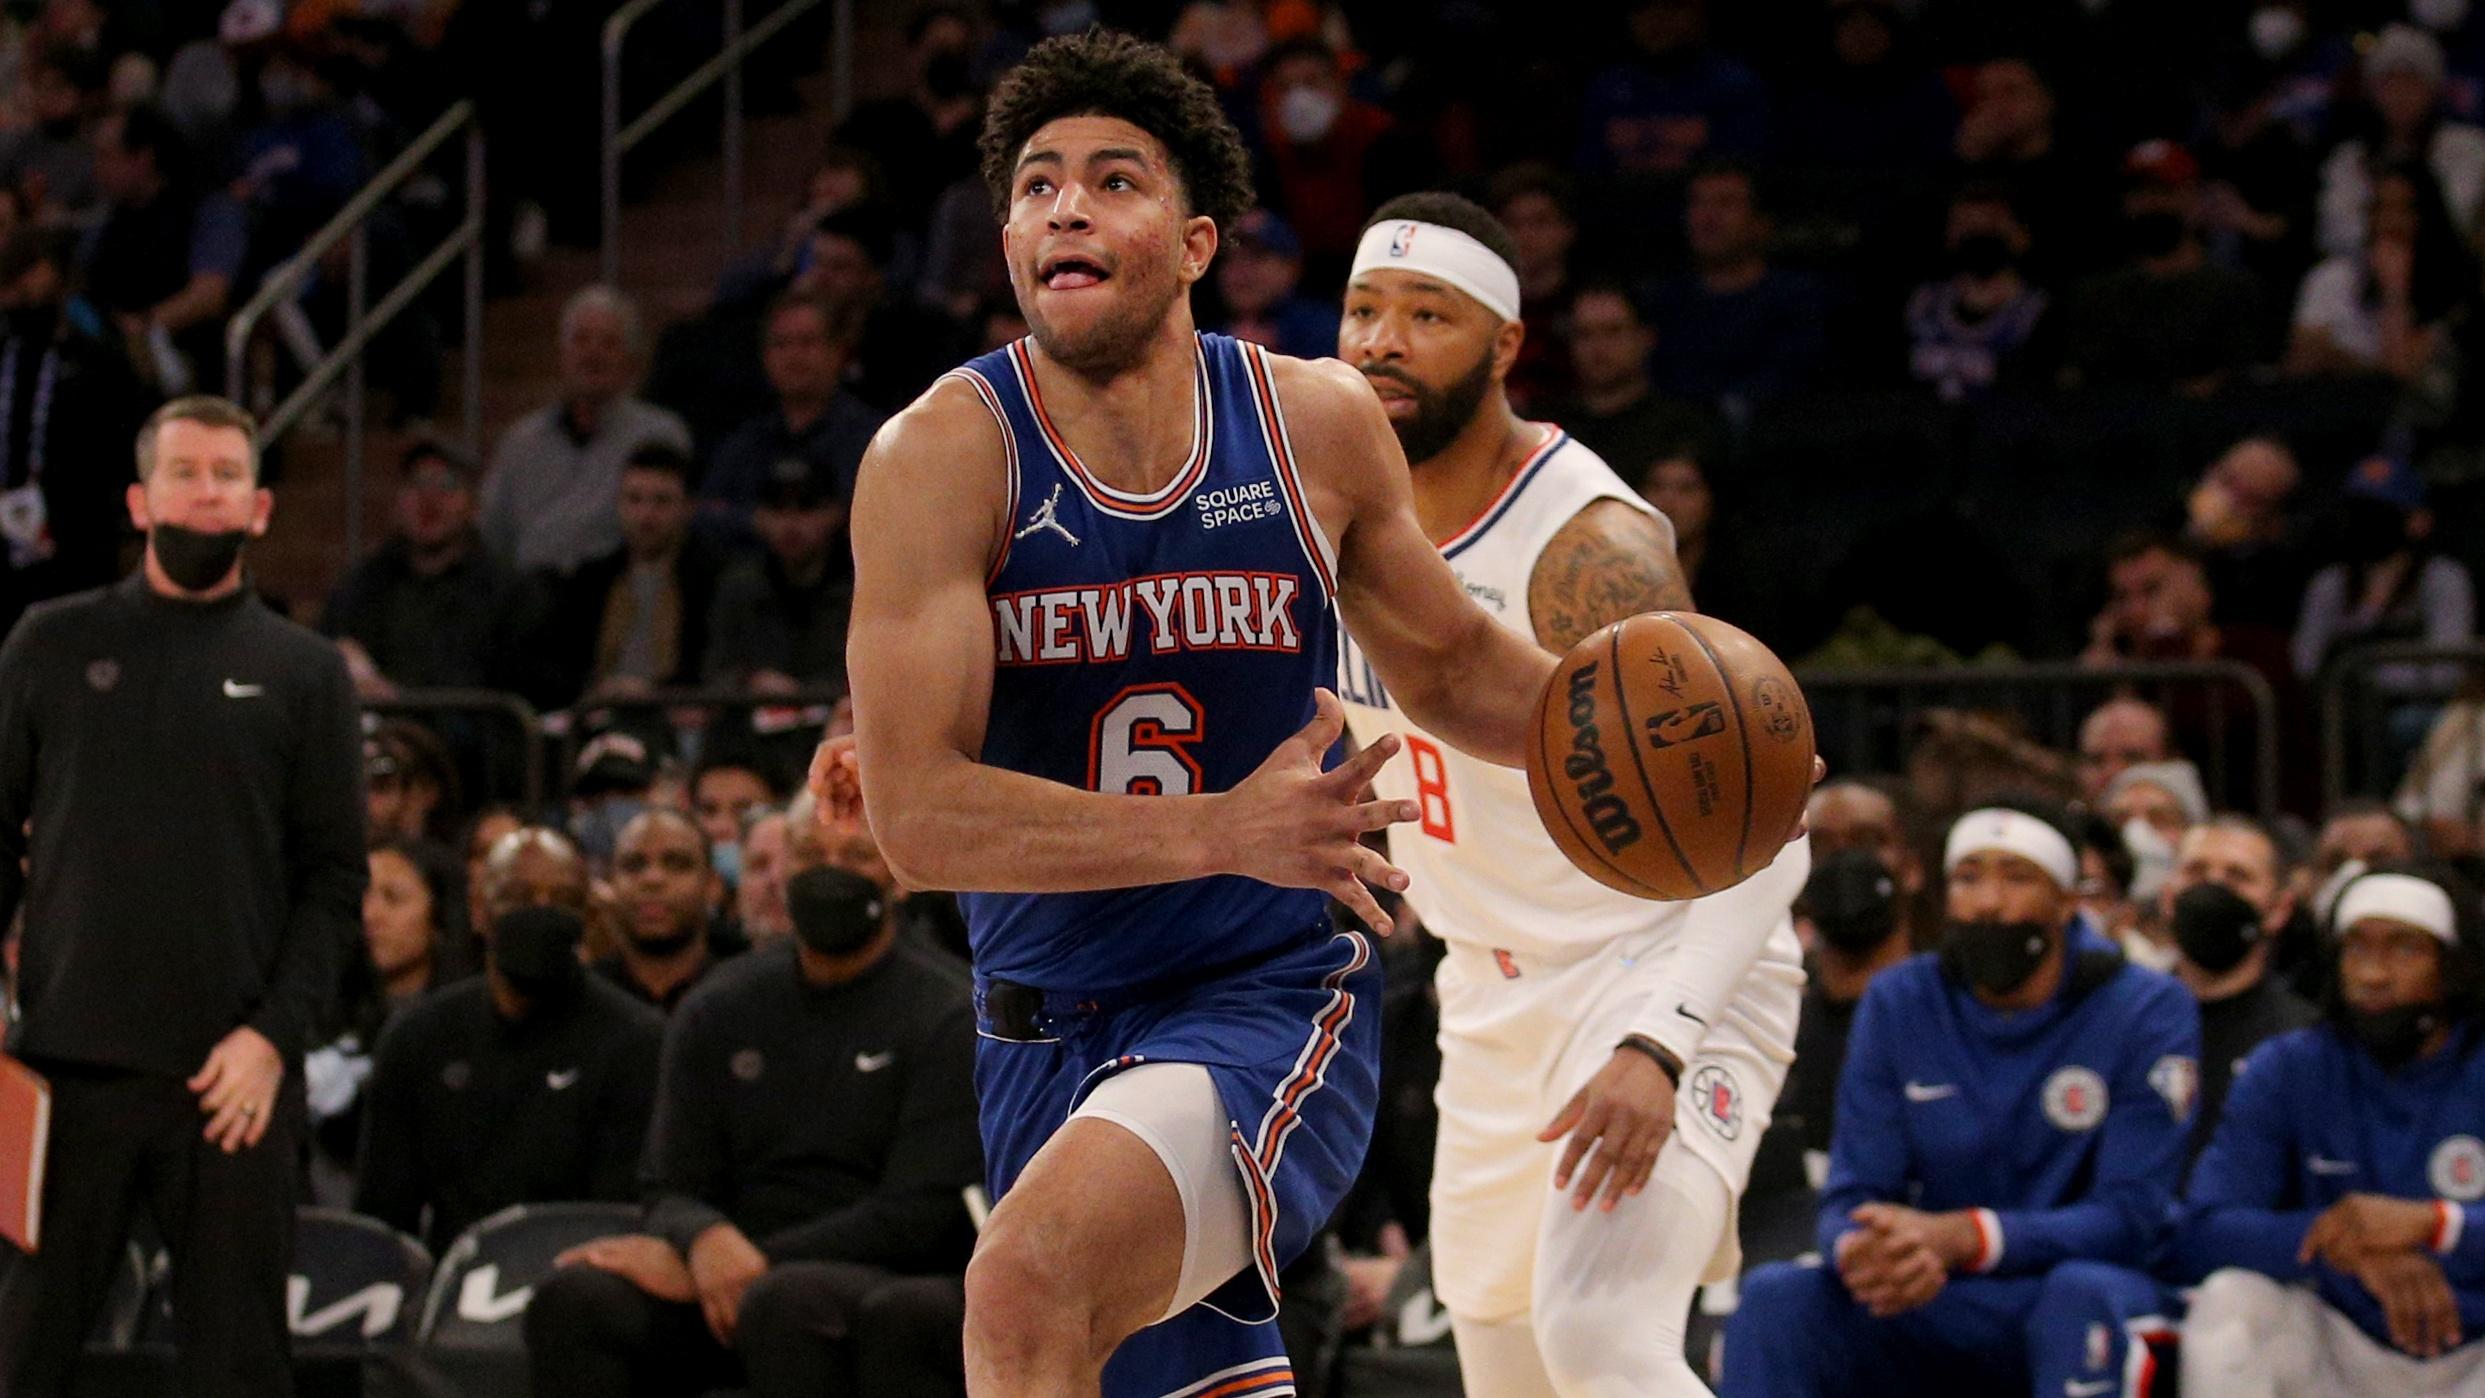 Jan 23, 2022; New York, New York, USA; New York Knicks guard Quentin Grimes (6) drives to the basket against Los Angeles Clippers forward Marcus Morris Sr. (8) during the second quarter at Madison Square Garden. Mandatory Credit: Brad Penner-USA TODAY Sports / © Brad Penner-USA TODAY Sports